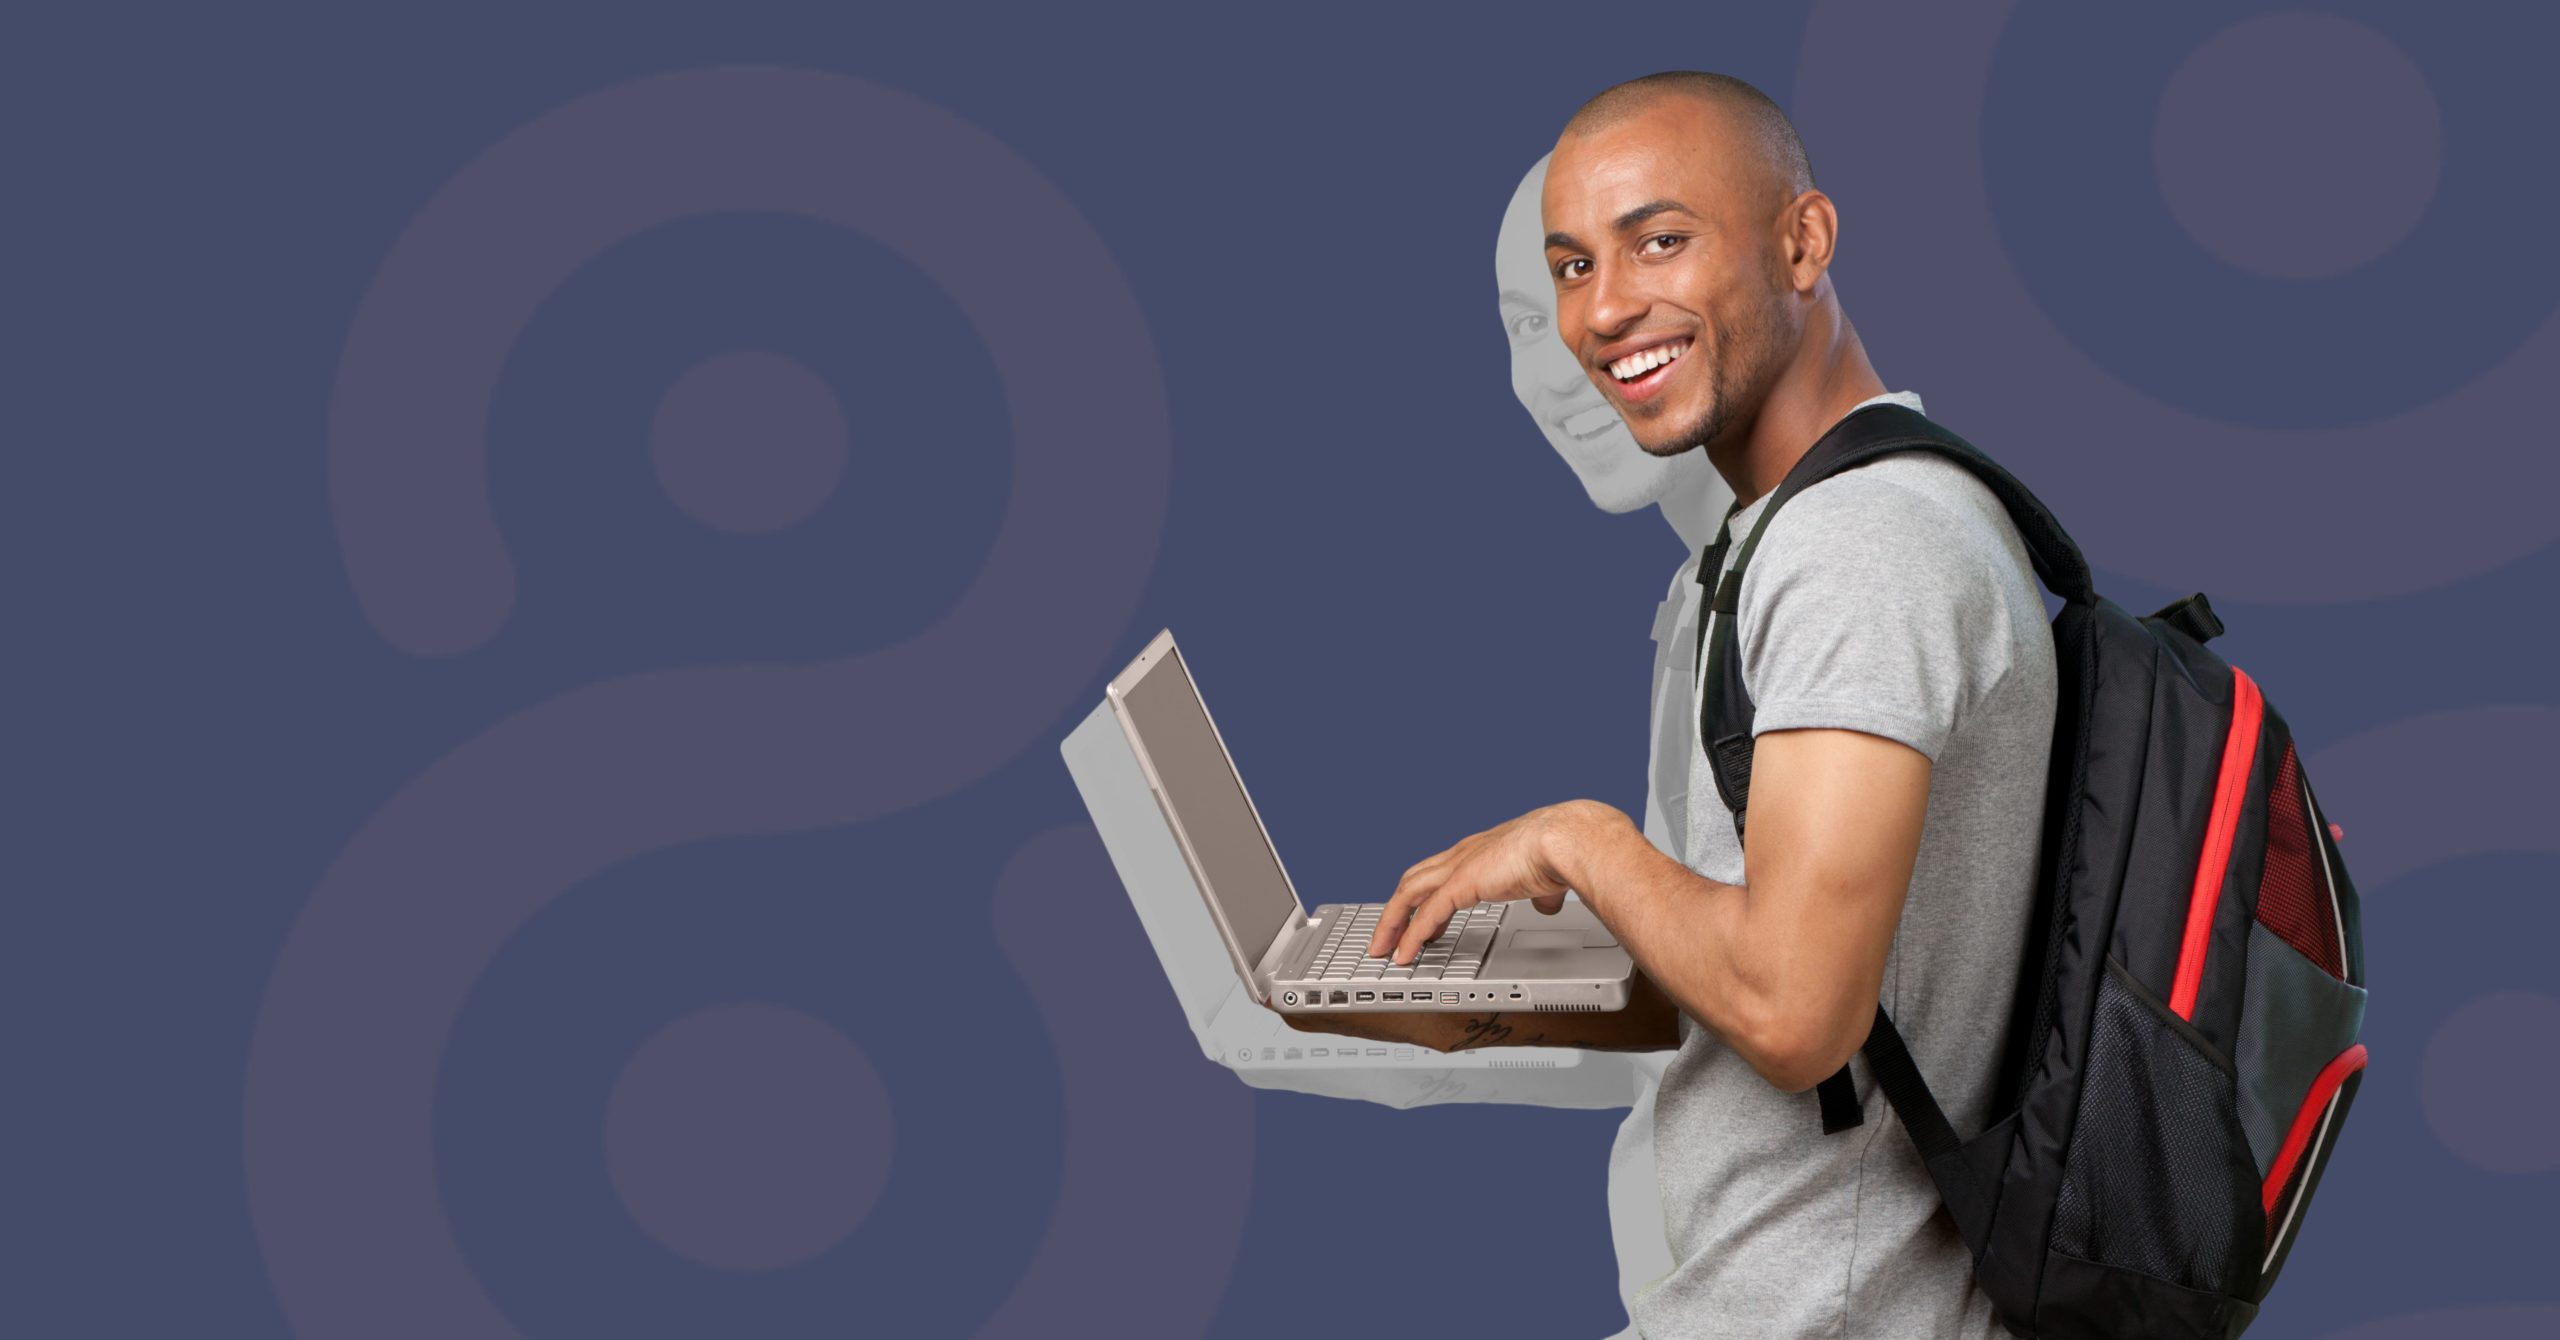 Smiling man with backpack holding laptop